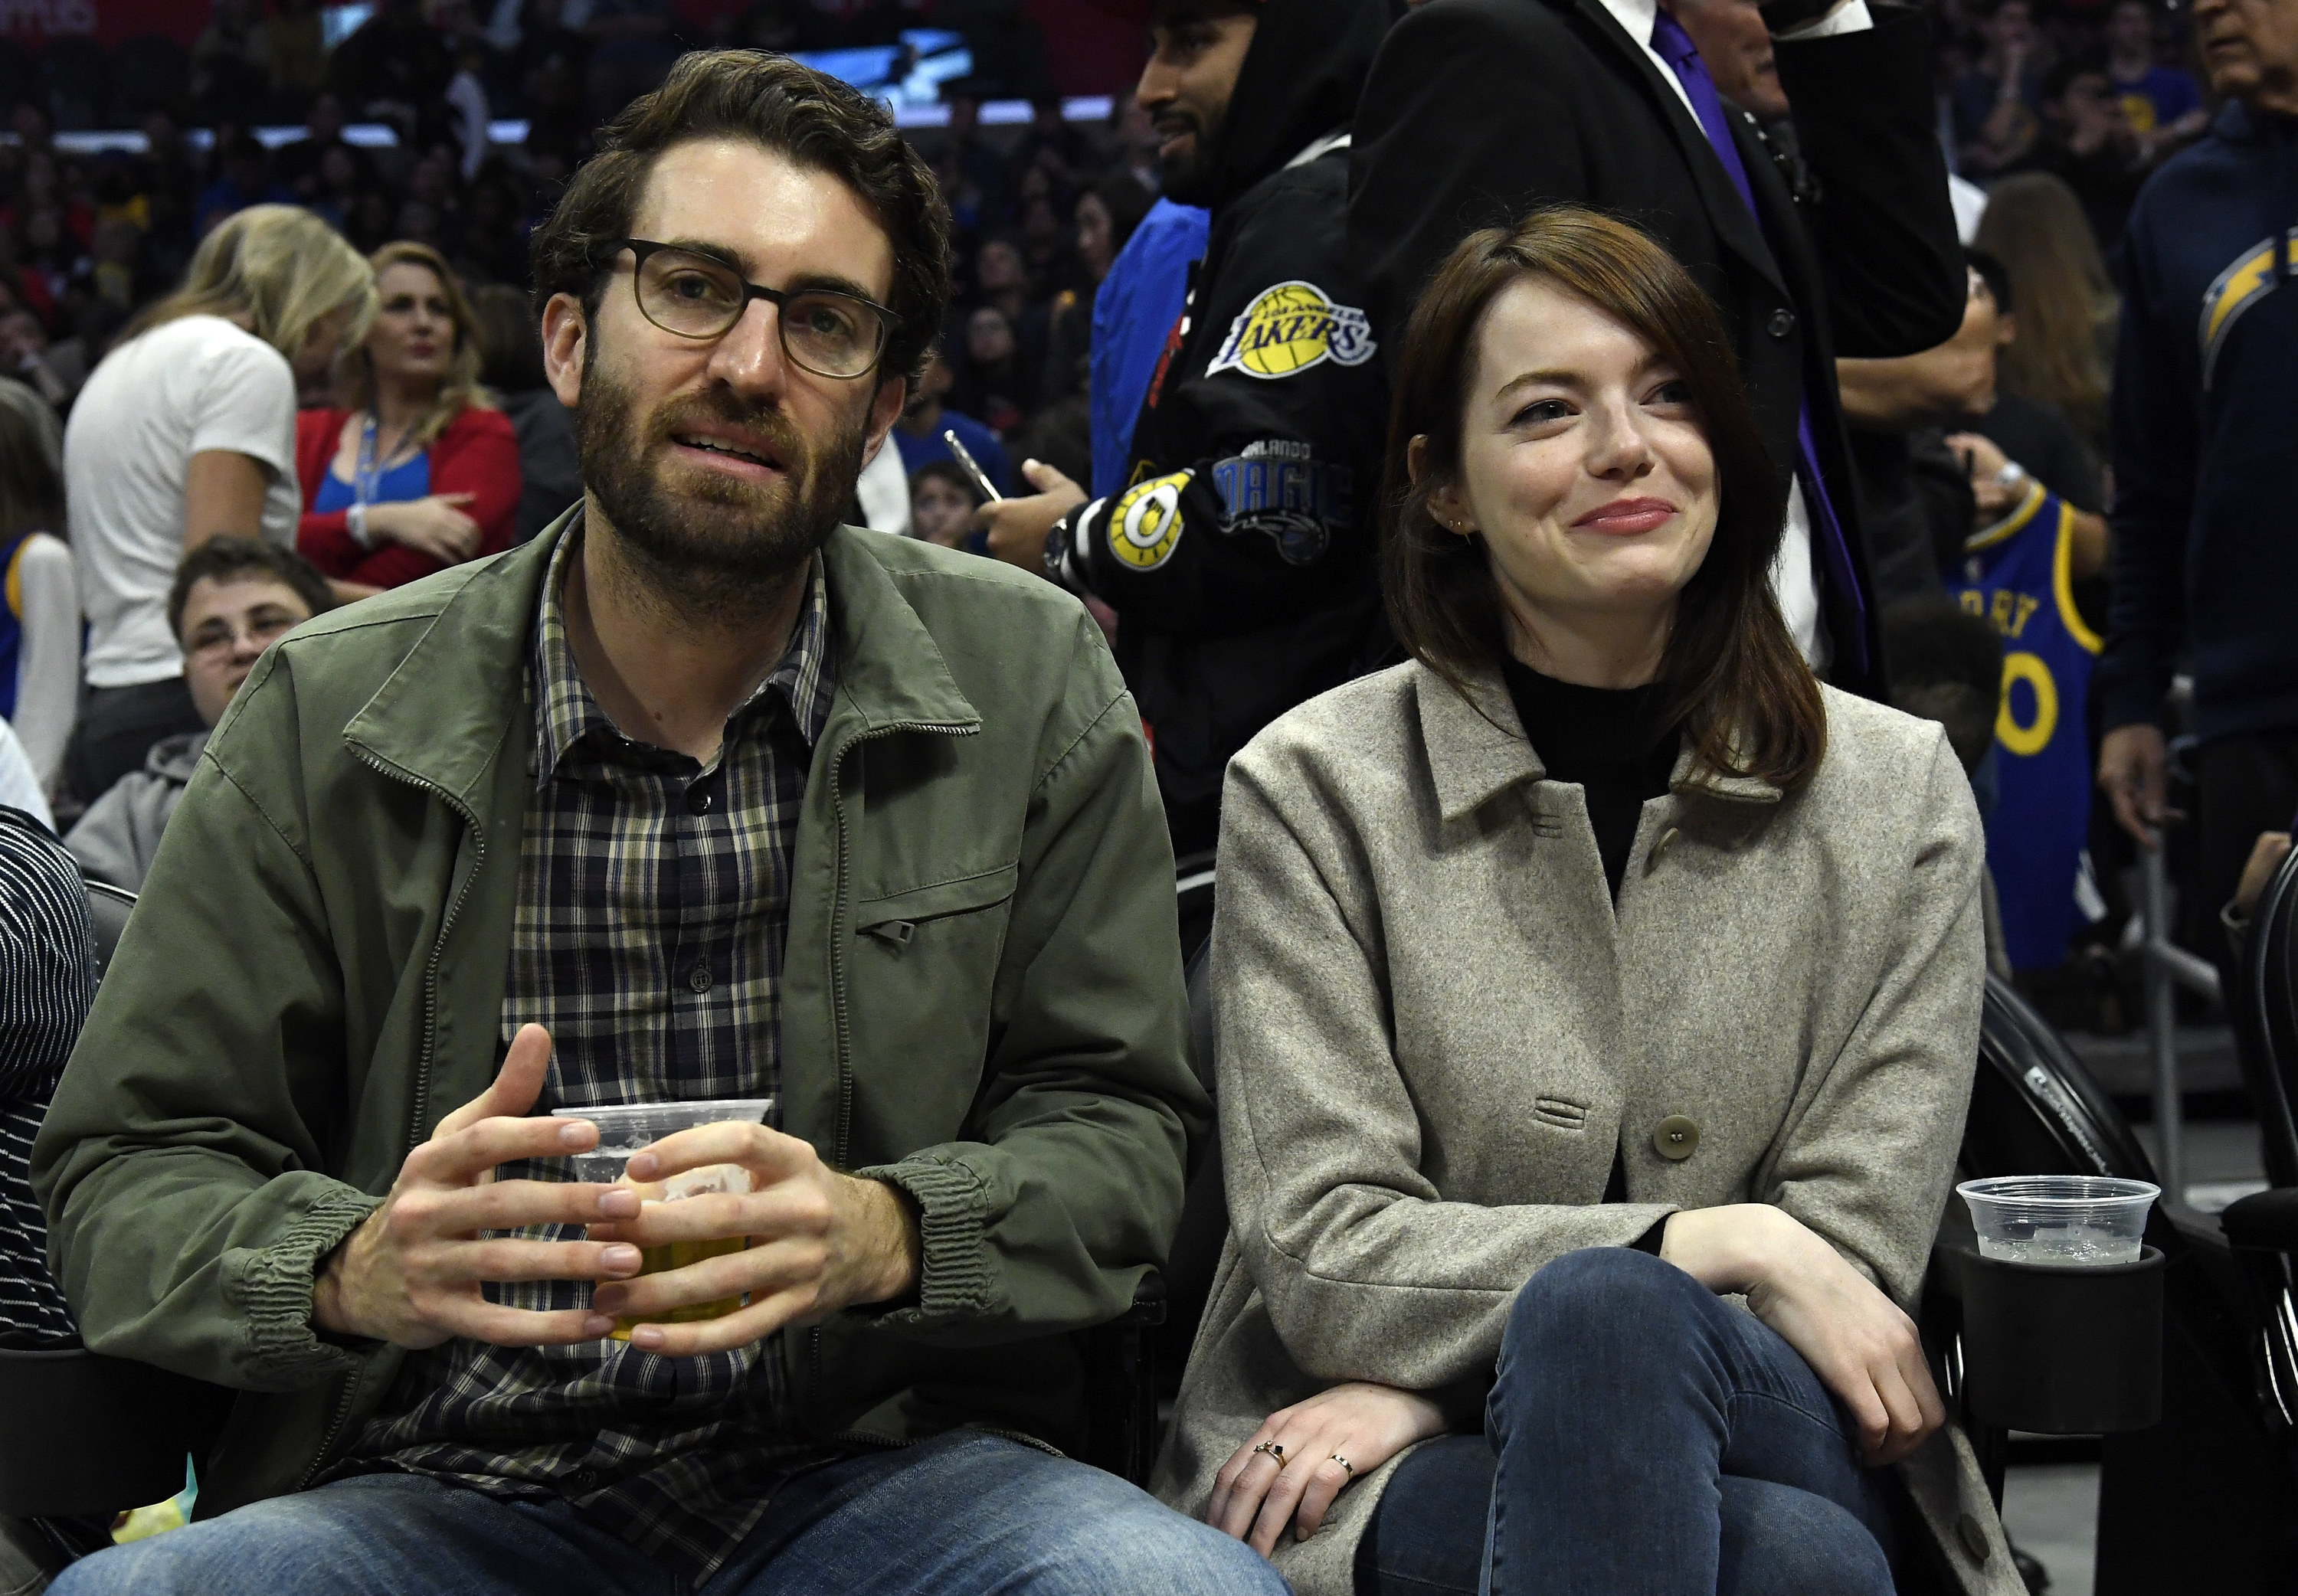 Emma Stone and Husband Dave McCary's Rare Photos Together After